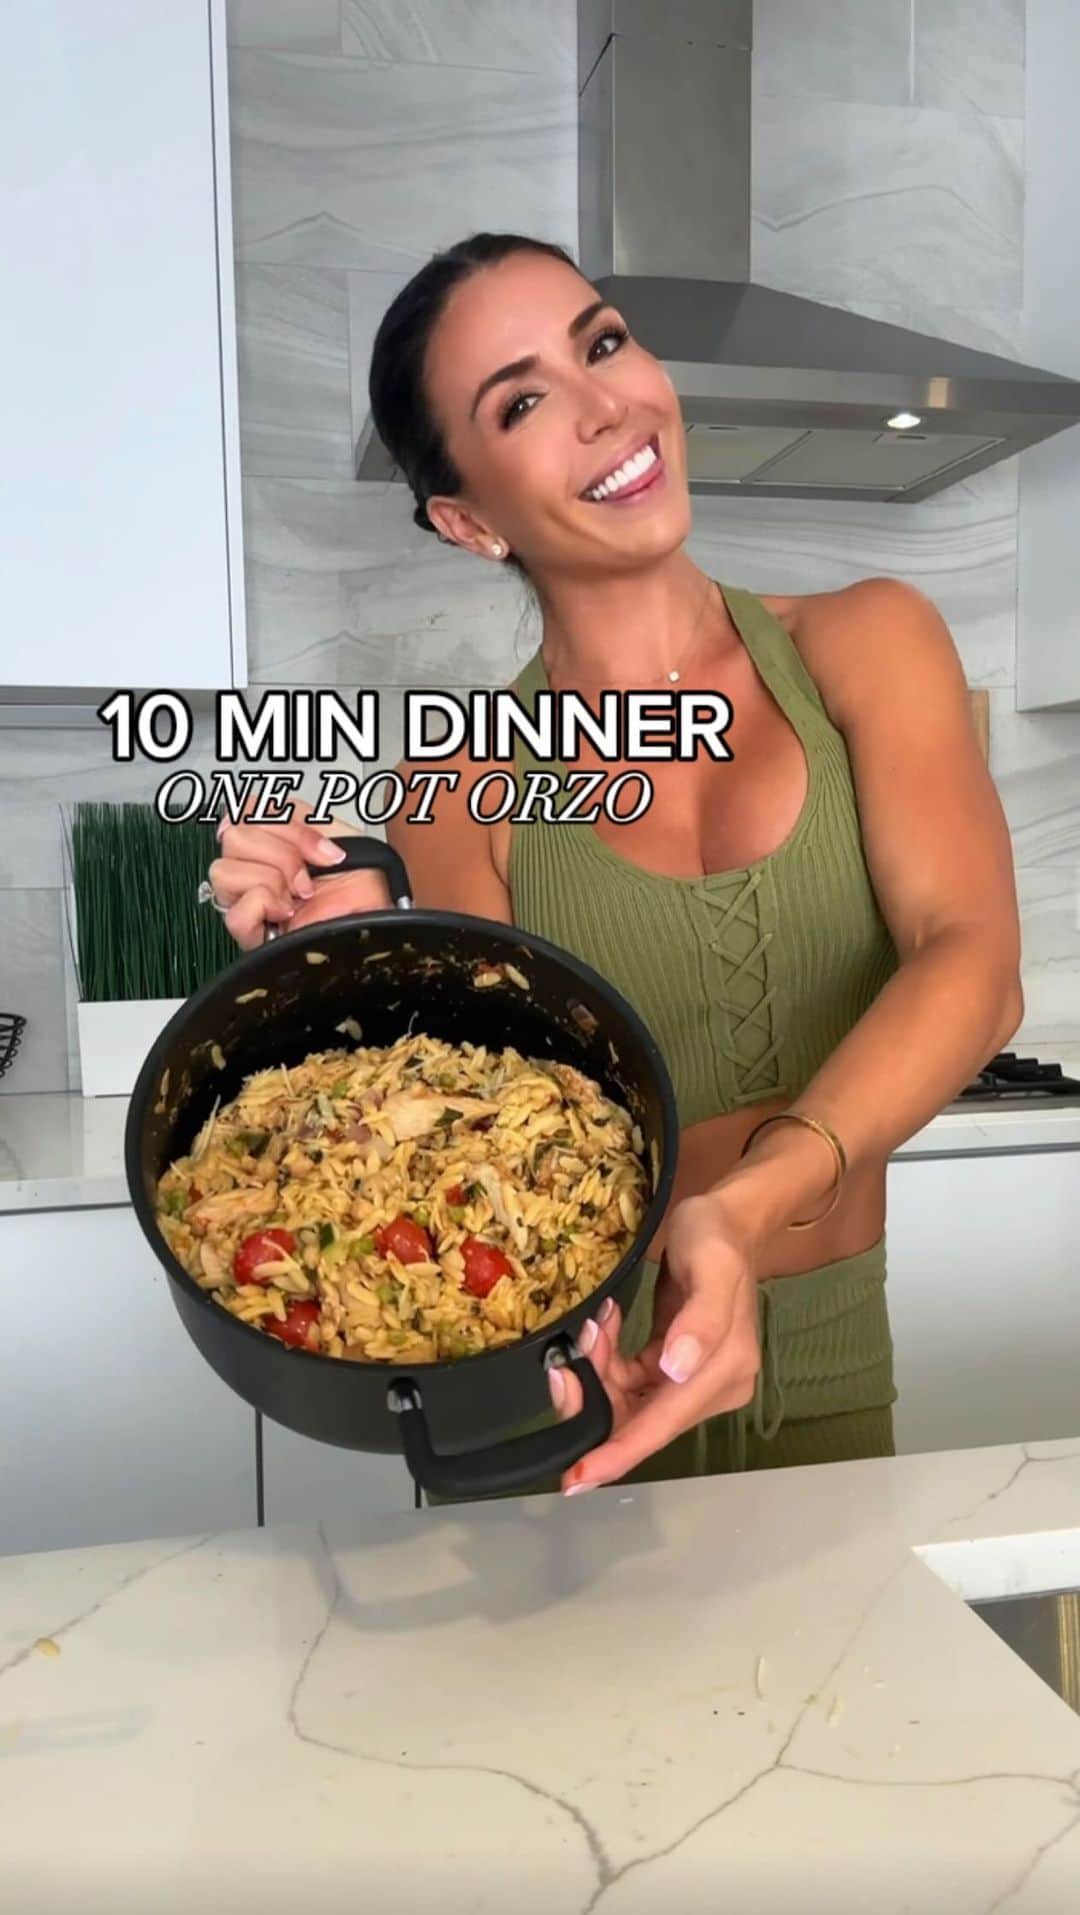 Ainsley Rodriguezのインスタグラム：「10 MINUTE ONE-POT HEALTHY ORZO recipe 🍝 . This is the perfect quick and easy dinner or meal prep that the entire family can enjoy! .  Ingredients: 1 tbsp olive oil 3/4c red onion 1tbsp minced garlic 1 can chickpeas rinsed and drained 2c cherry tomatoes 1c diced zucchini 16 oz orzo 5 cups water 1c frozen peas 2c chopped spinach 22oz @justmeats.co use CODE: Ainsley15 for $15 OFF . Instructions: 1. In a large pot on medium heat, sauté onion, garlic, tomatoes, zucchini and chickpeas for a few minutes. 2. Pour in the orzo and water 3. About halfway through cooking add peas, spinach & chicken 4. This should take about 10 minutes! Taste orzo when the liquid is absorbed and make sure it’s tender to your liking. 5. Sprinkle with Parmesan and enjoy! . #10minutedinner #onepotmeal #easydinner #easymeals #healthydinner」